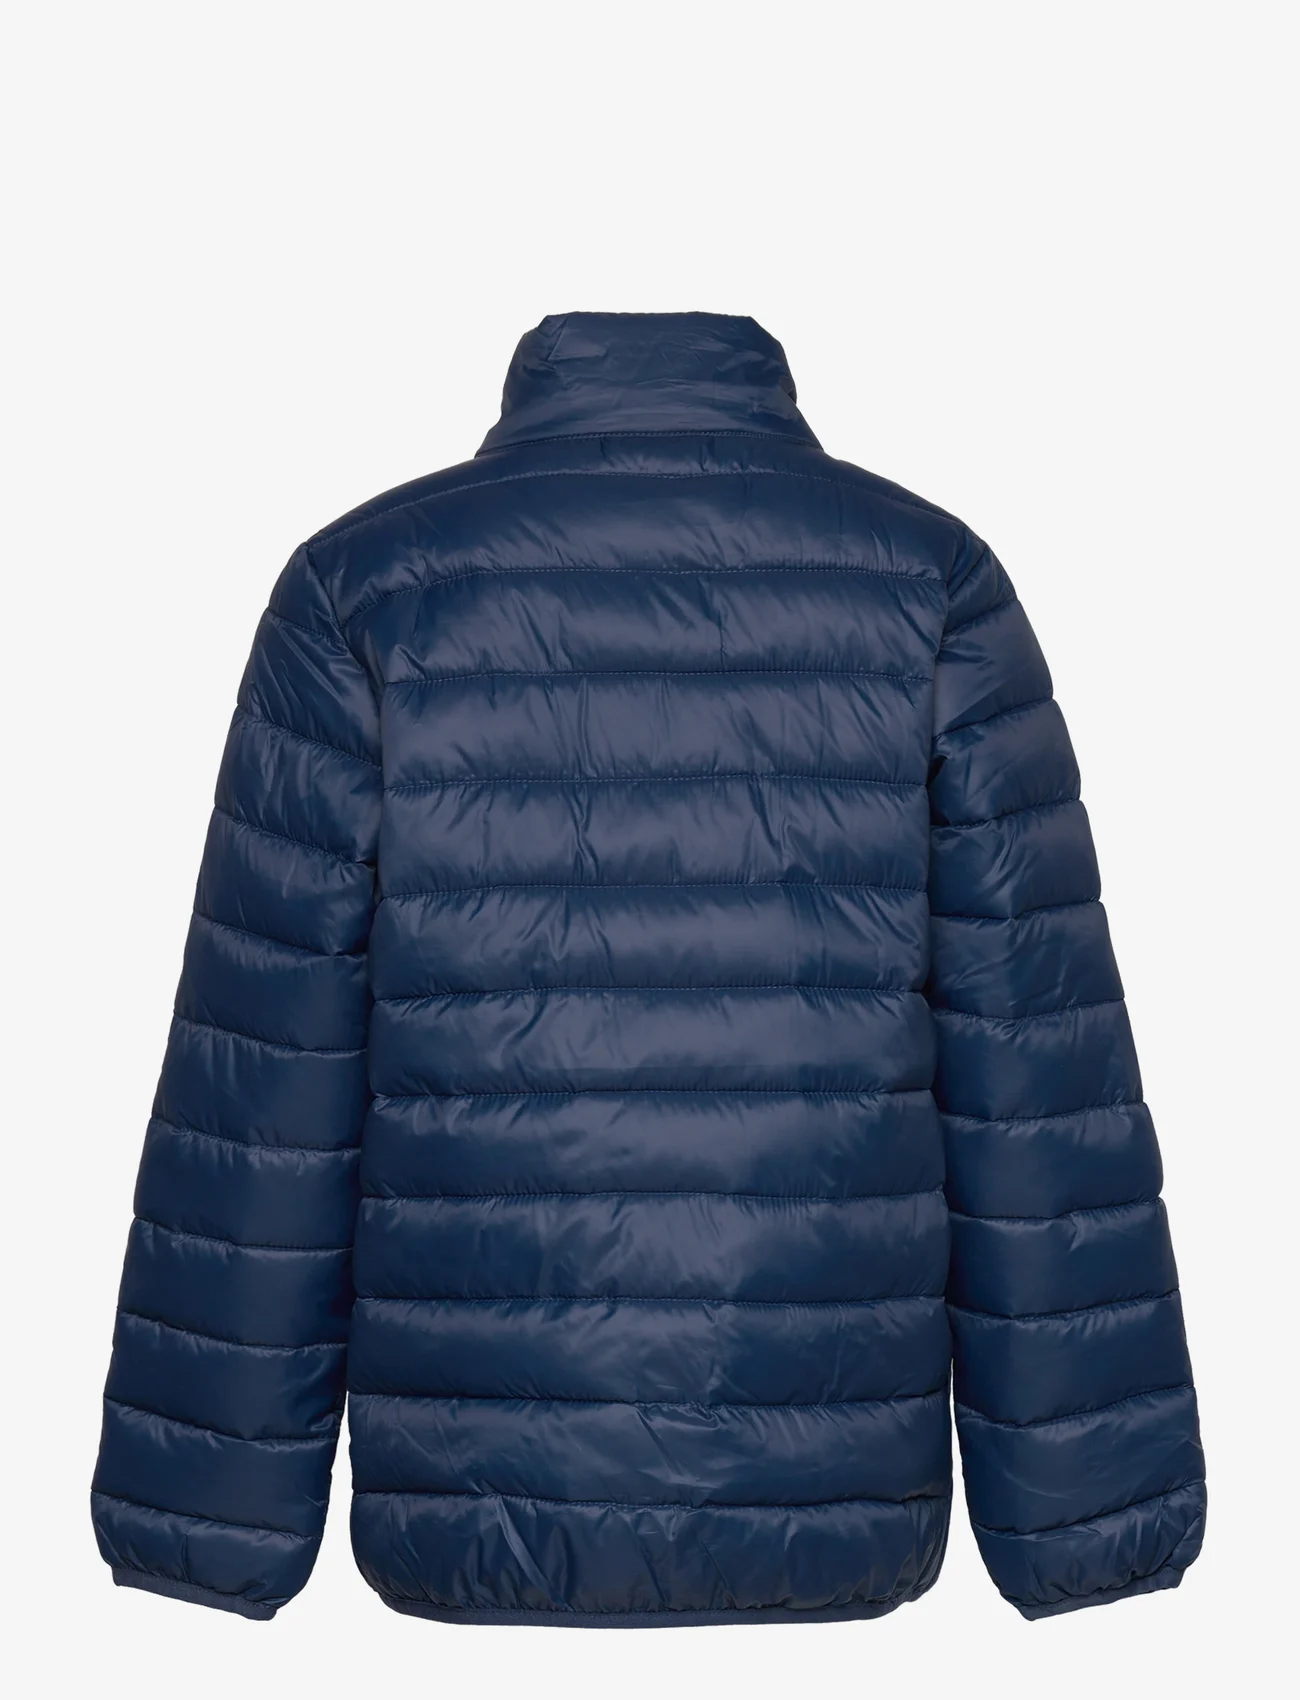 CeLaVi - Qulted Jacket - SOLID - puffer & padded - sargasso sea - 1